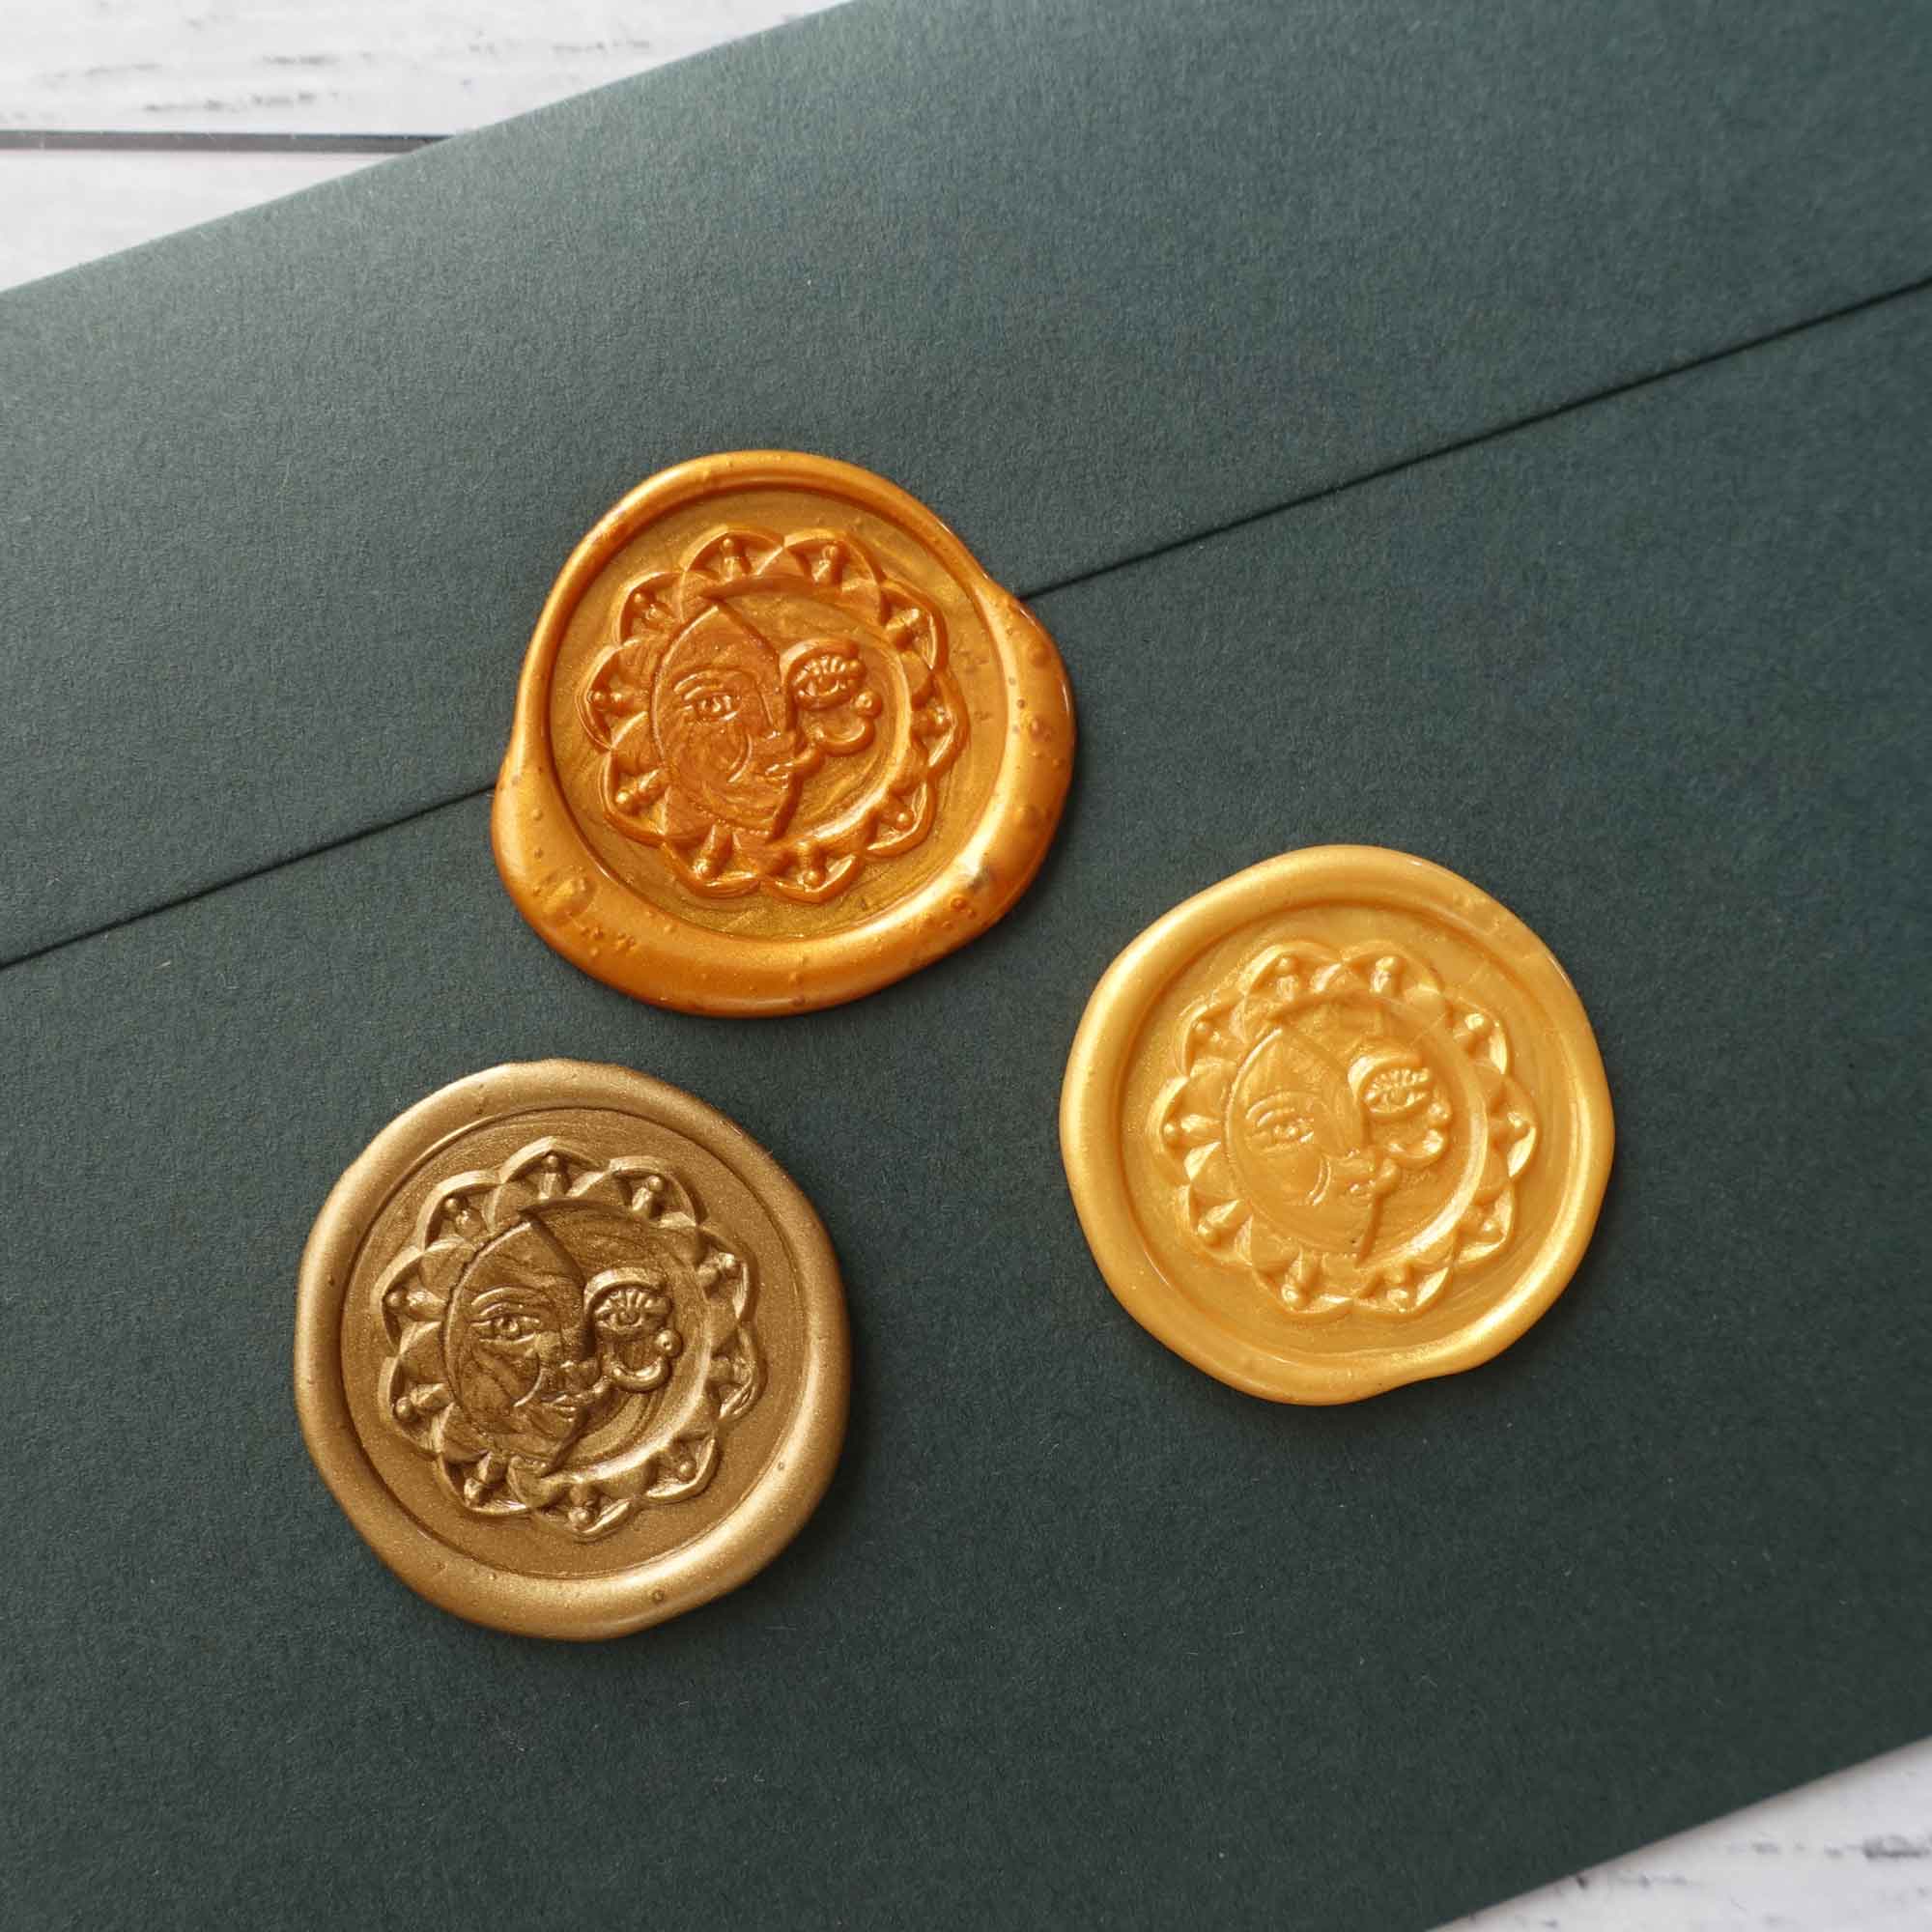 Sun and Moon bronze yellow amber gold wax seals on envelope